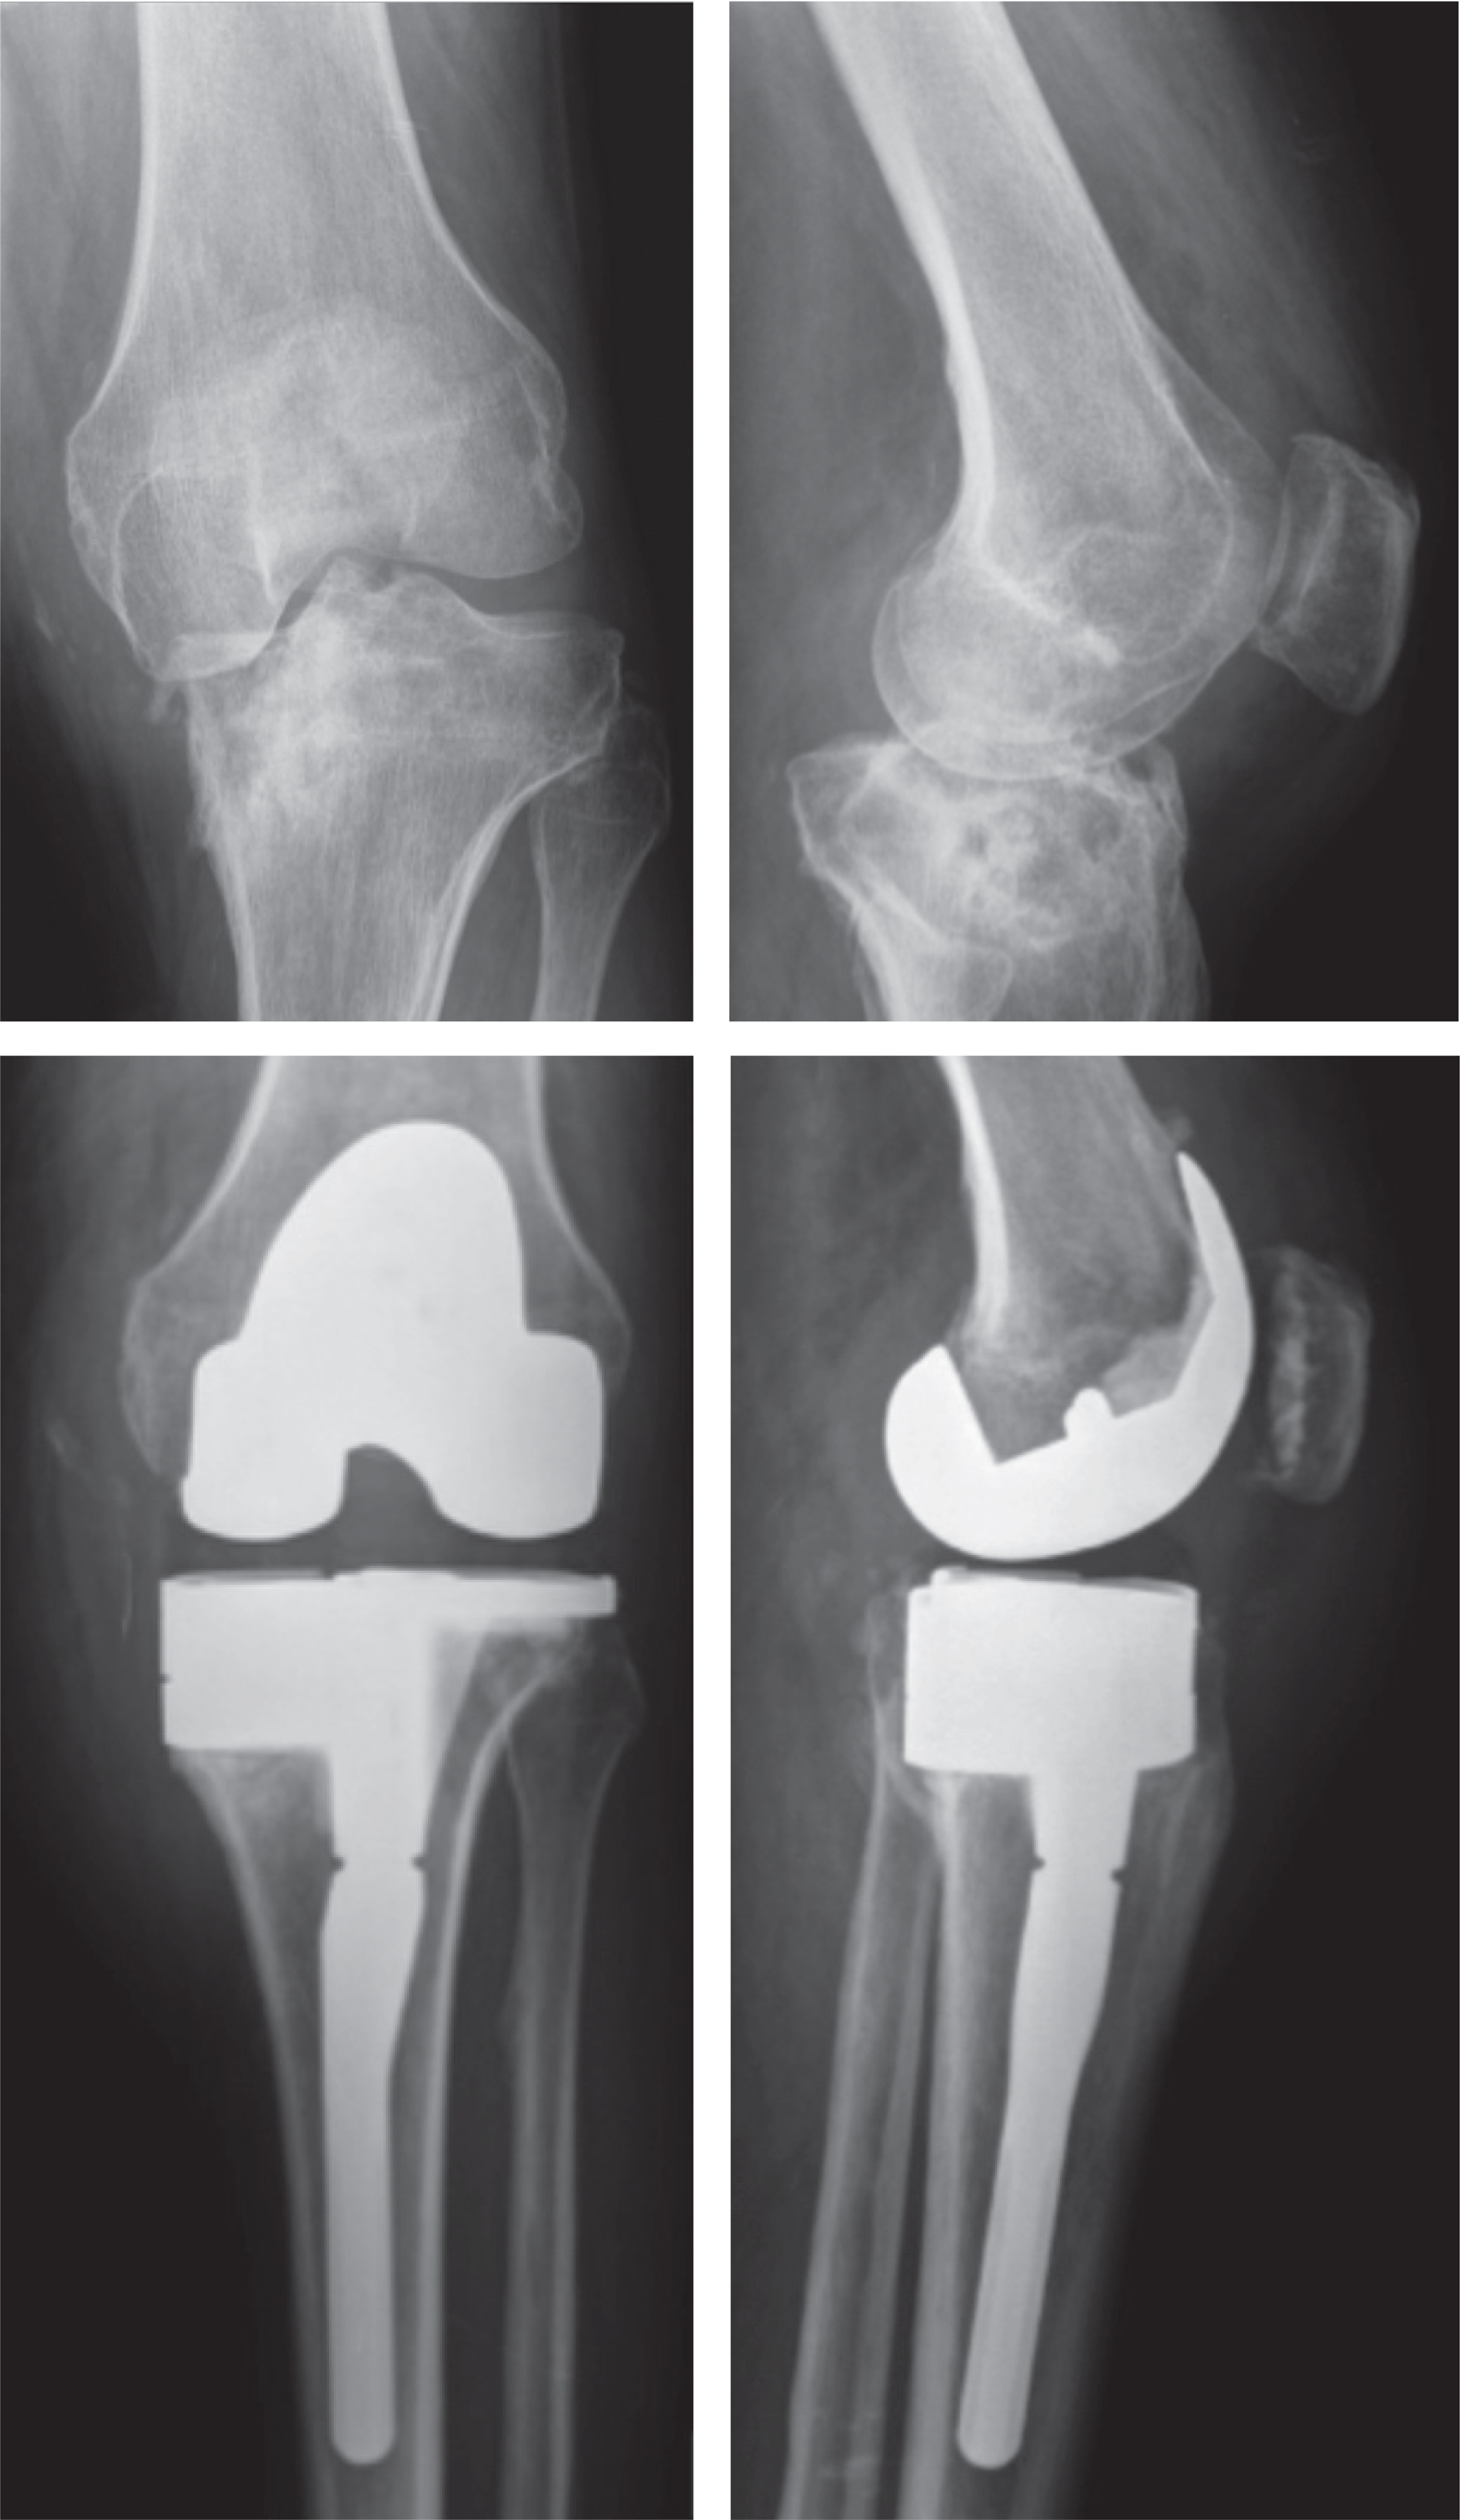 Figure 1. A typical case: a 60-year-old active man with a history of fracture of the medial tibial plateau. TKA required use of stems and augments and a muscular flap. At 8 years, the patient is doing well but still has limitation of flexion at 105° and is limited during his activities of daily living. The implant is radiographically stable.